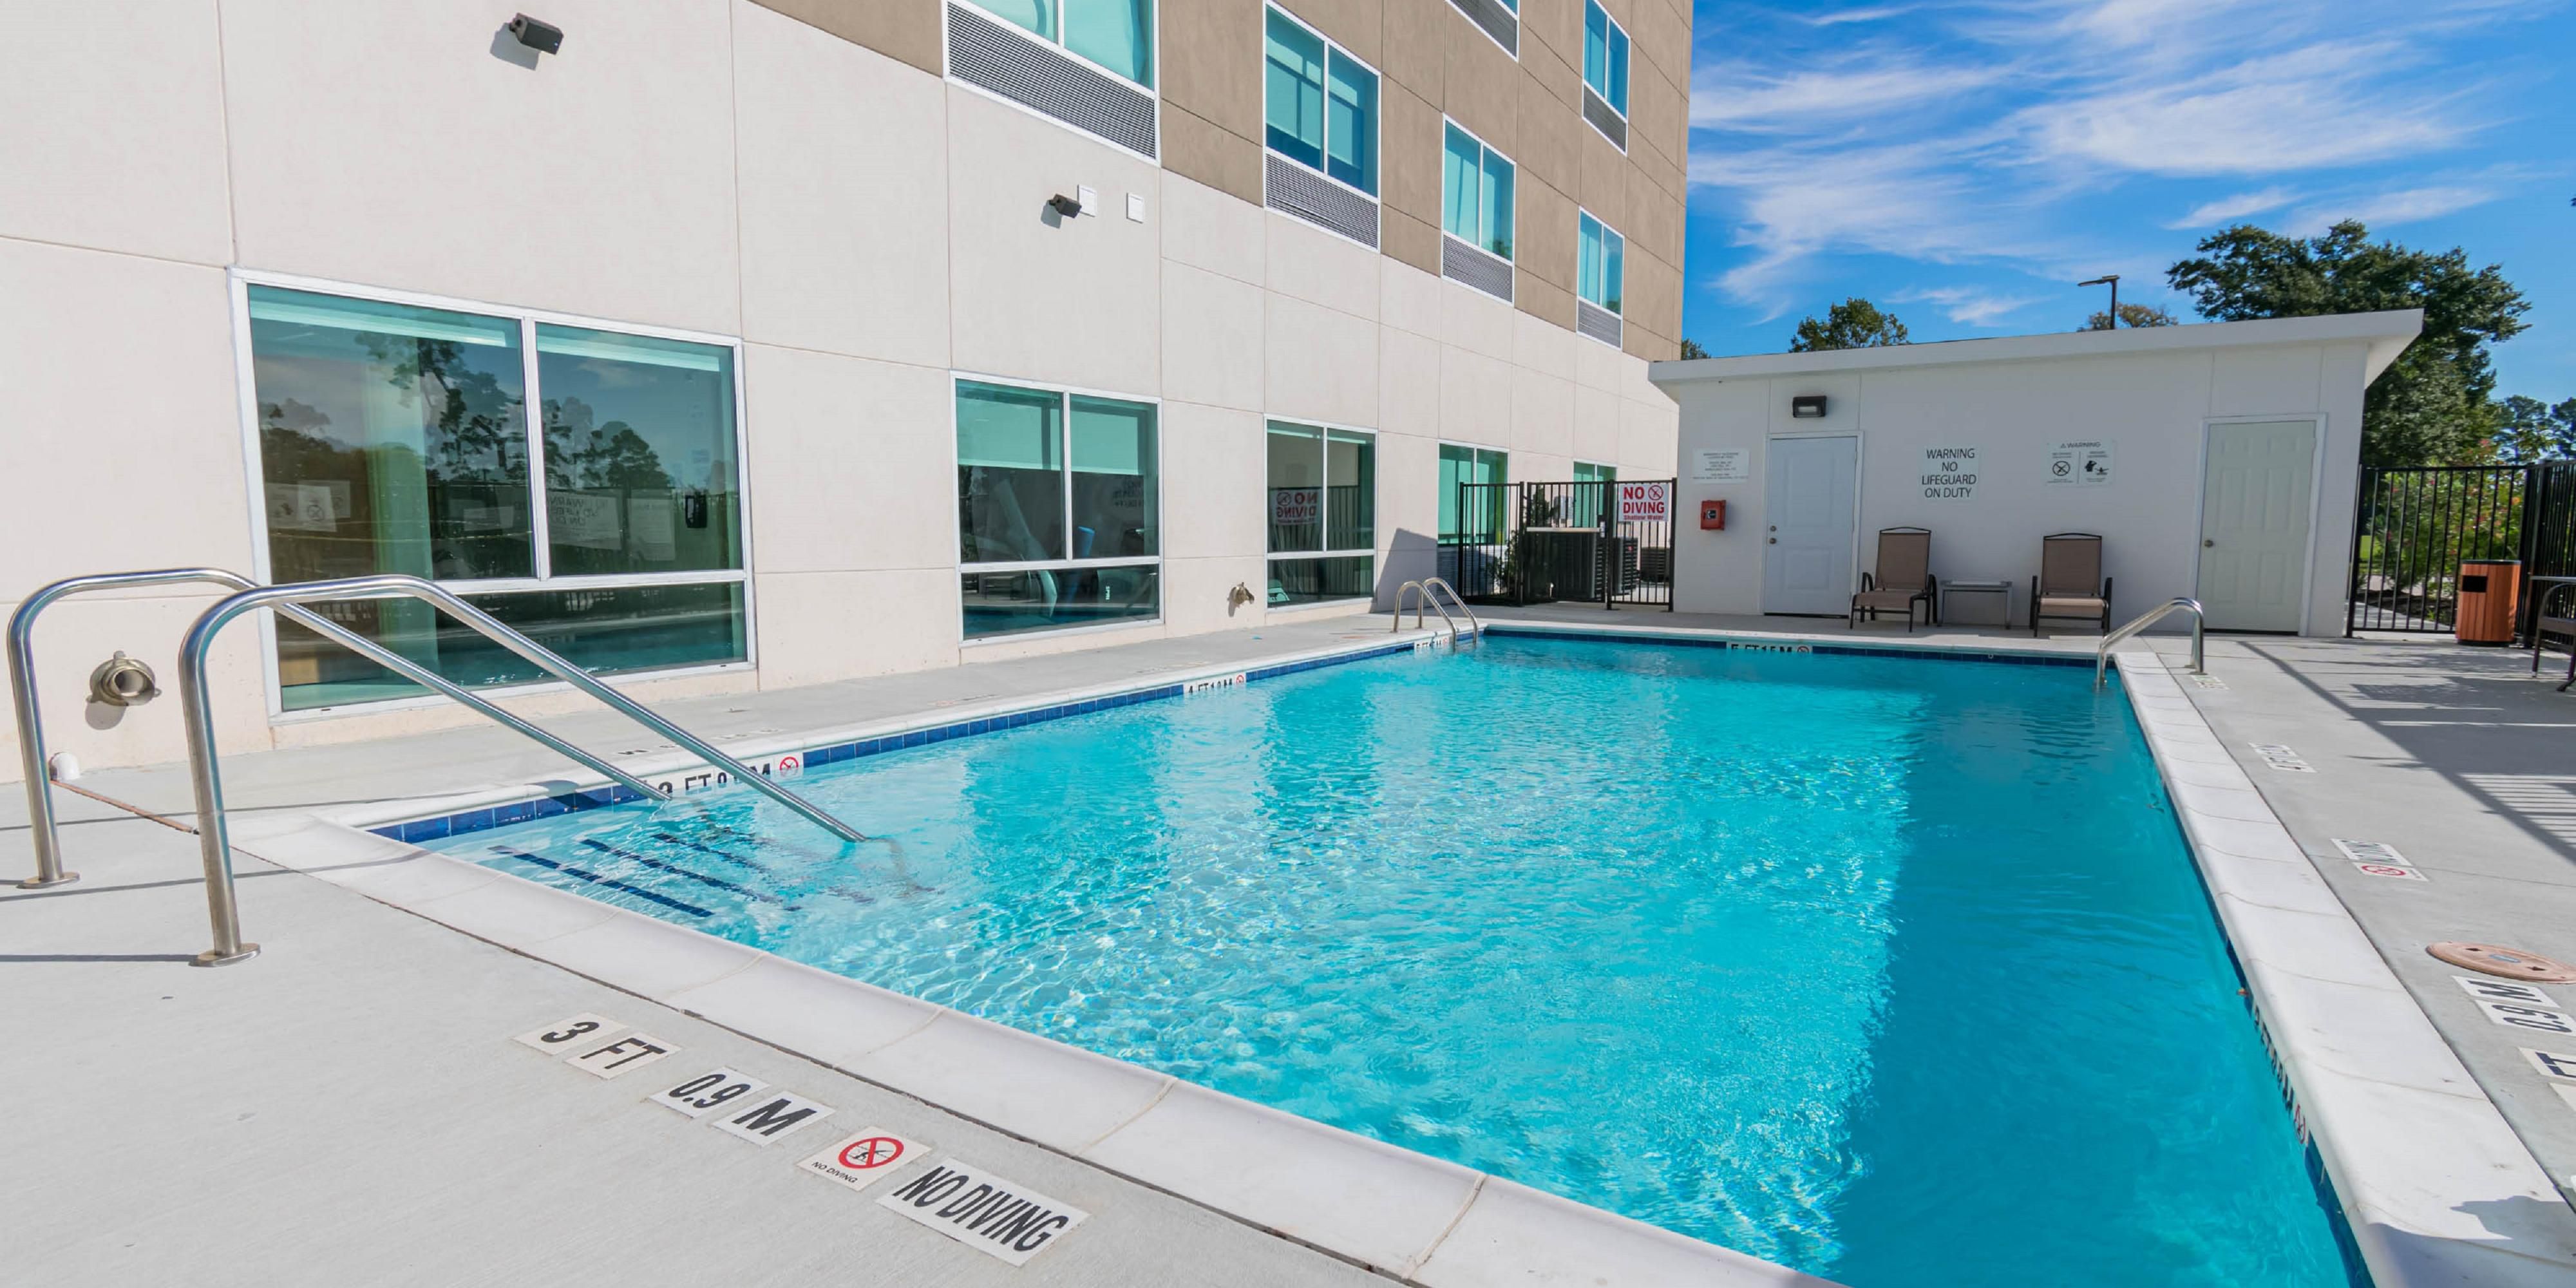 Relax and enjoy our outdoor pool.  Call hotel for availability and details.  